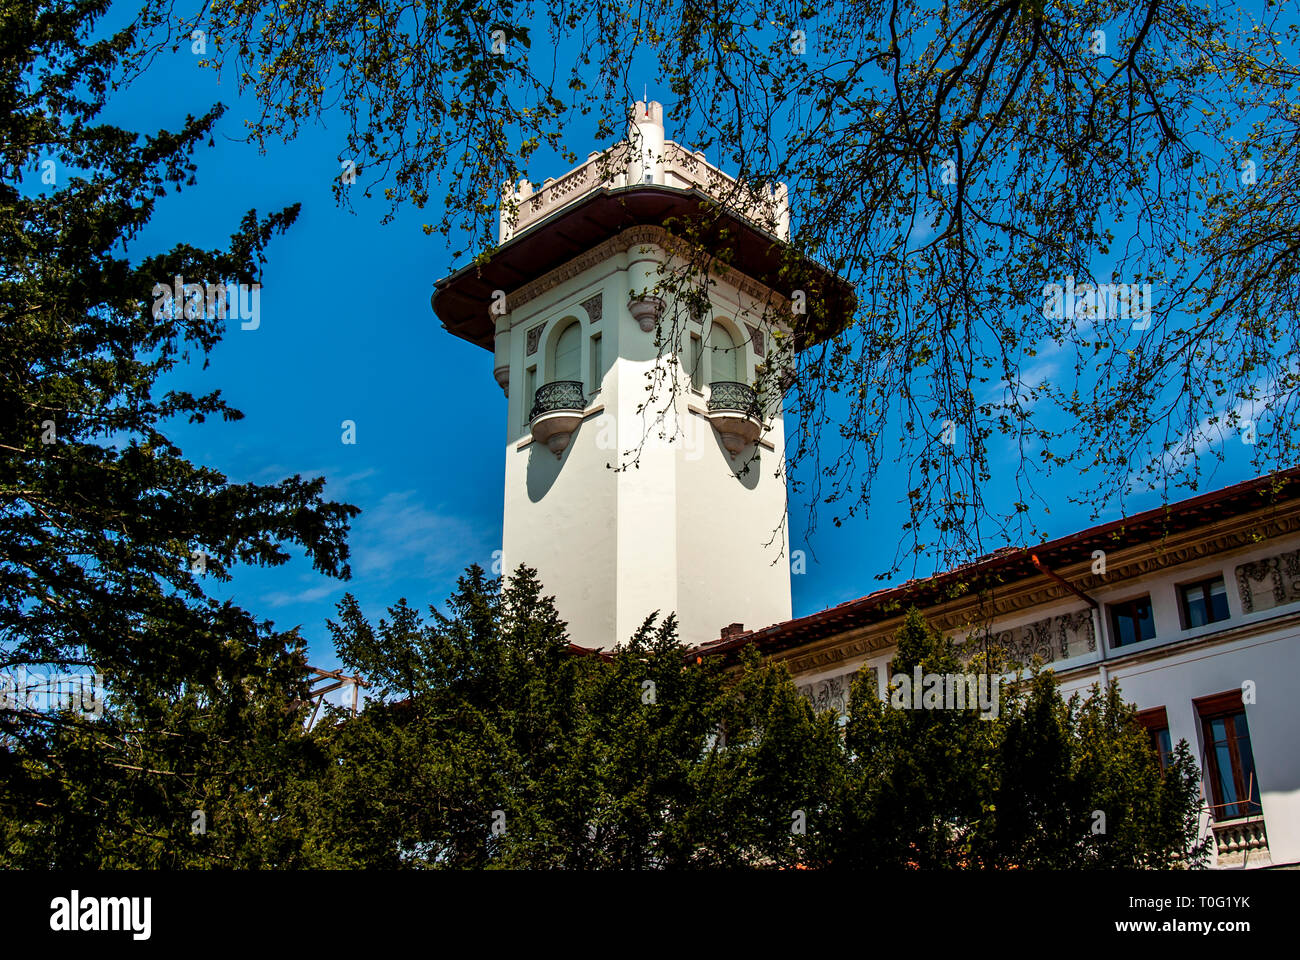 Istanbul, Turkey, 17 April 2006: Hidiv Palace Tower at sunny day. Stock Photo